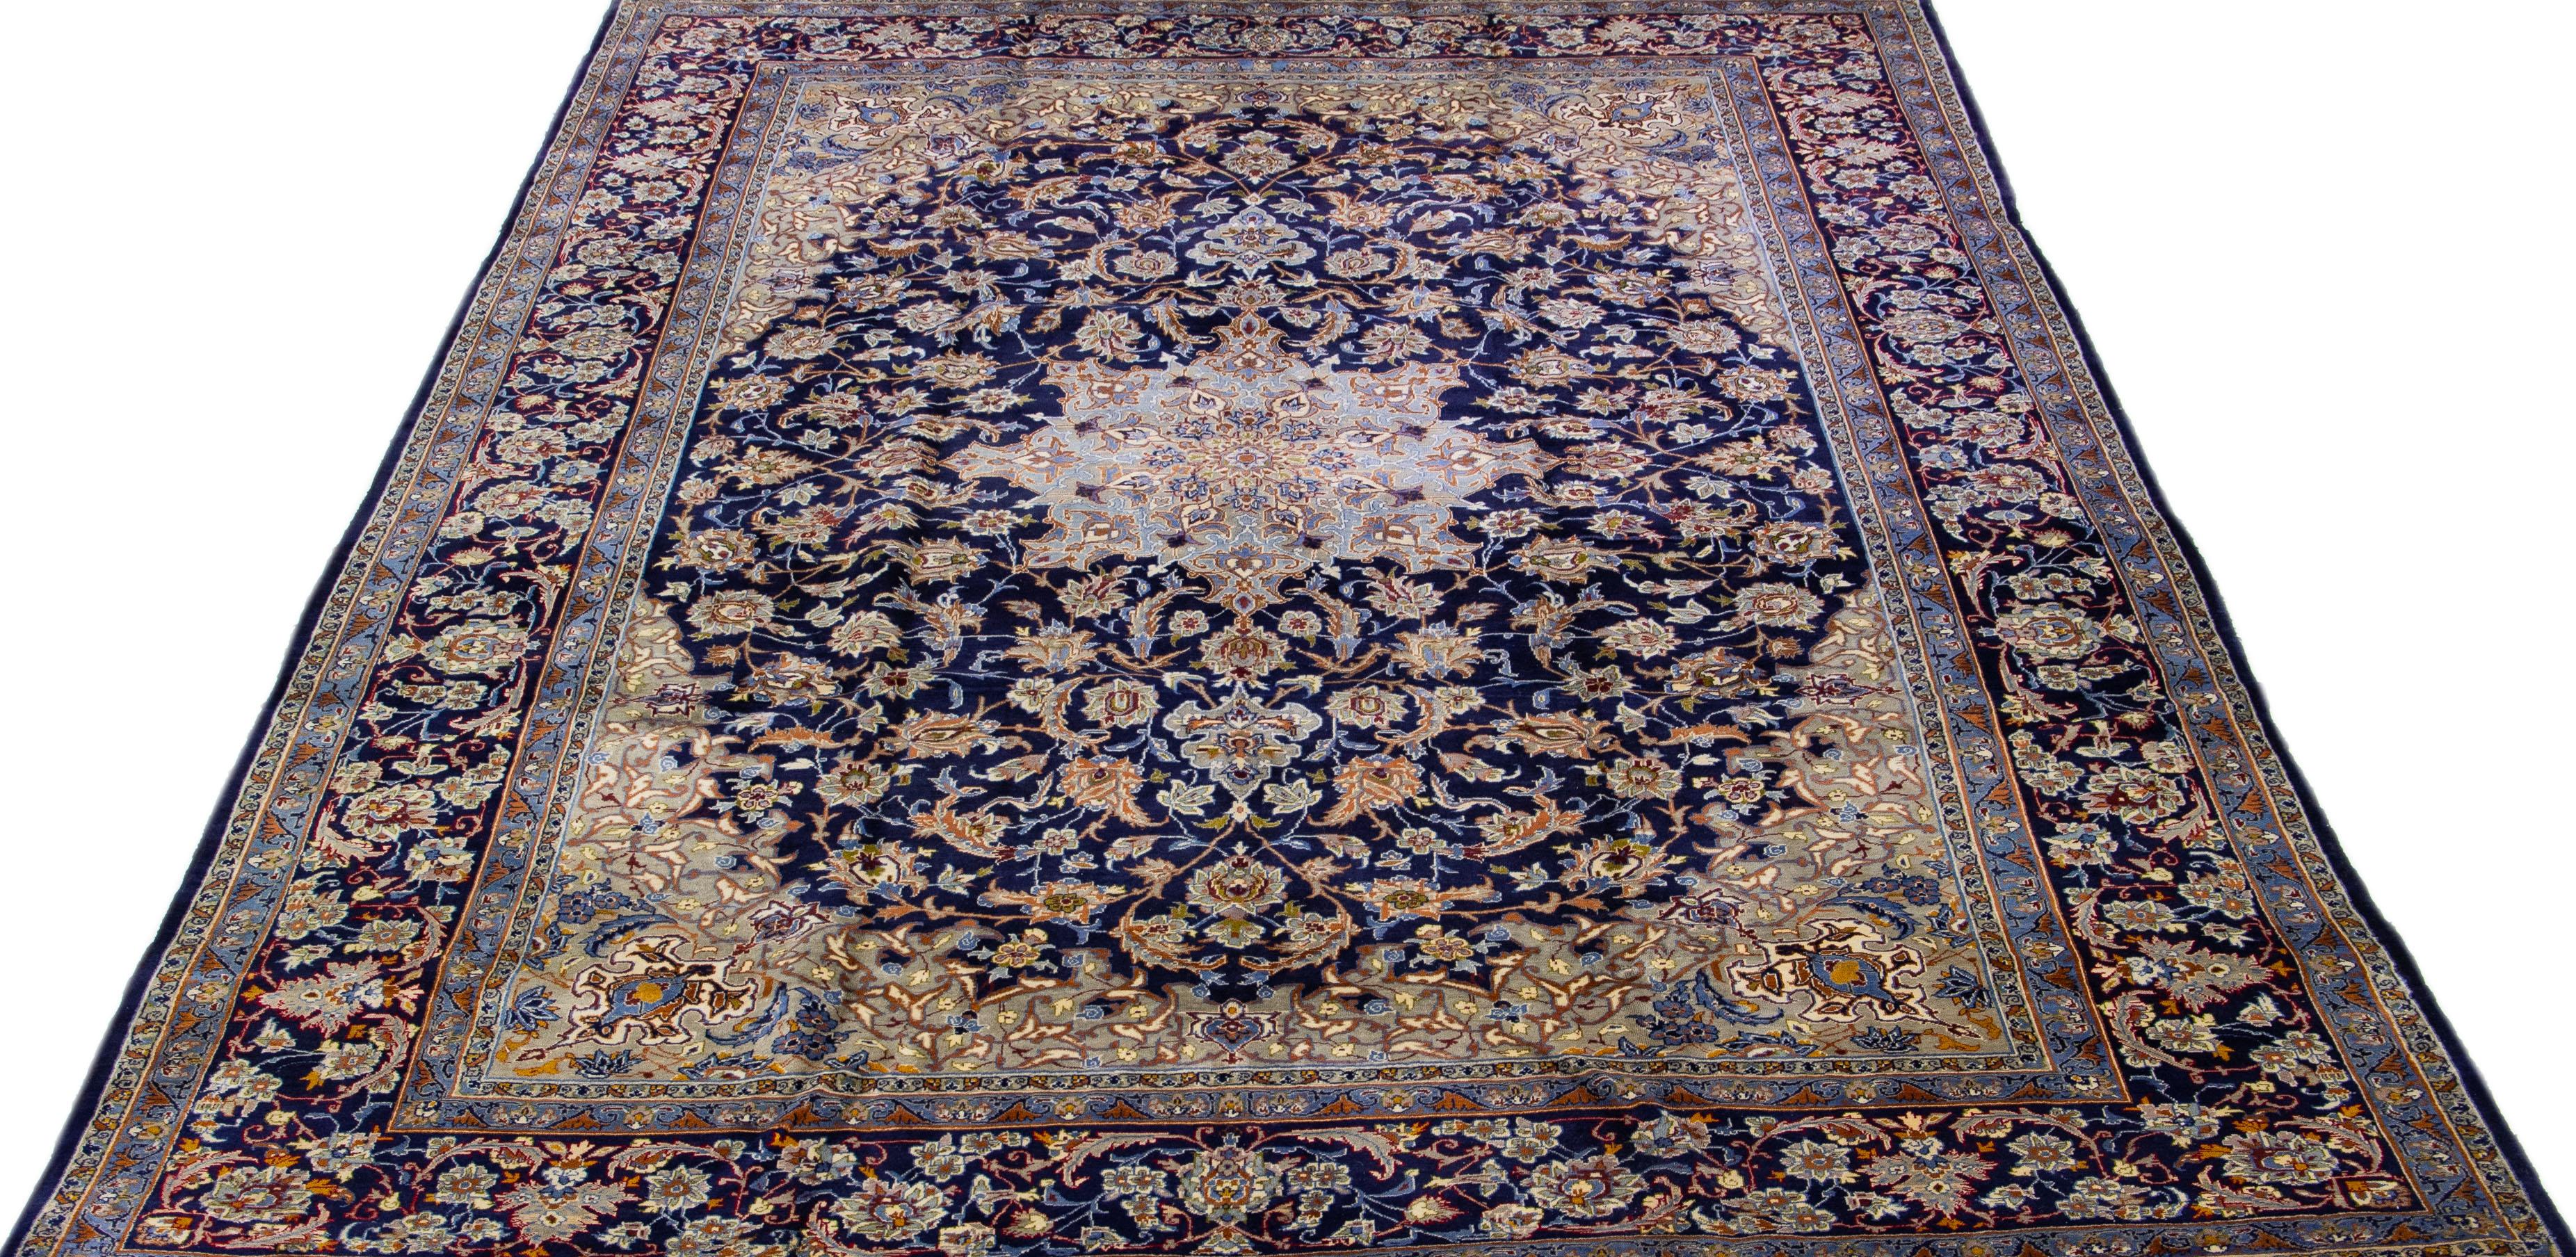 Allover Handmade Antique Persian Isfahan Natural Wool Rug in Blue In Good Condition For Sale In Norwalk, CT